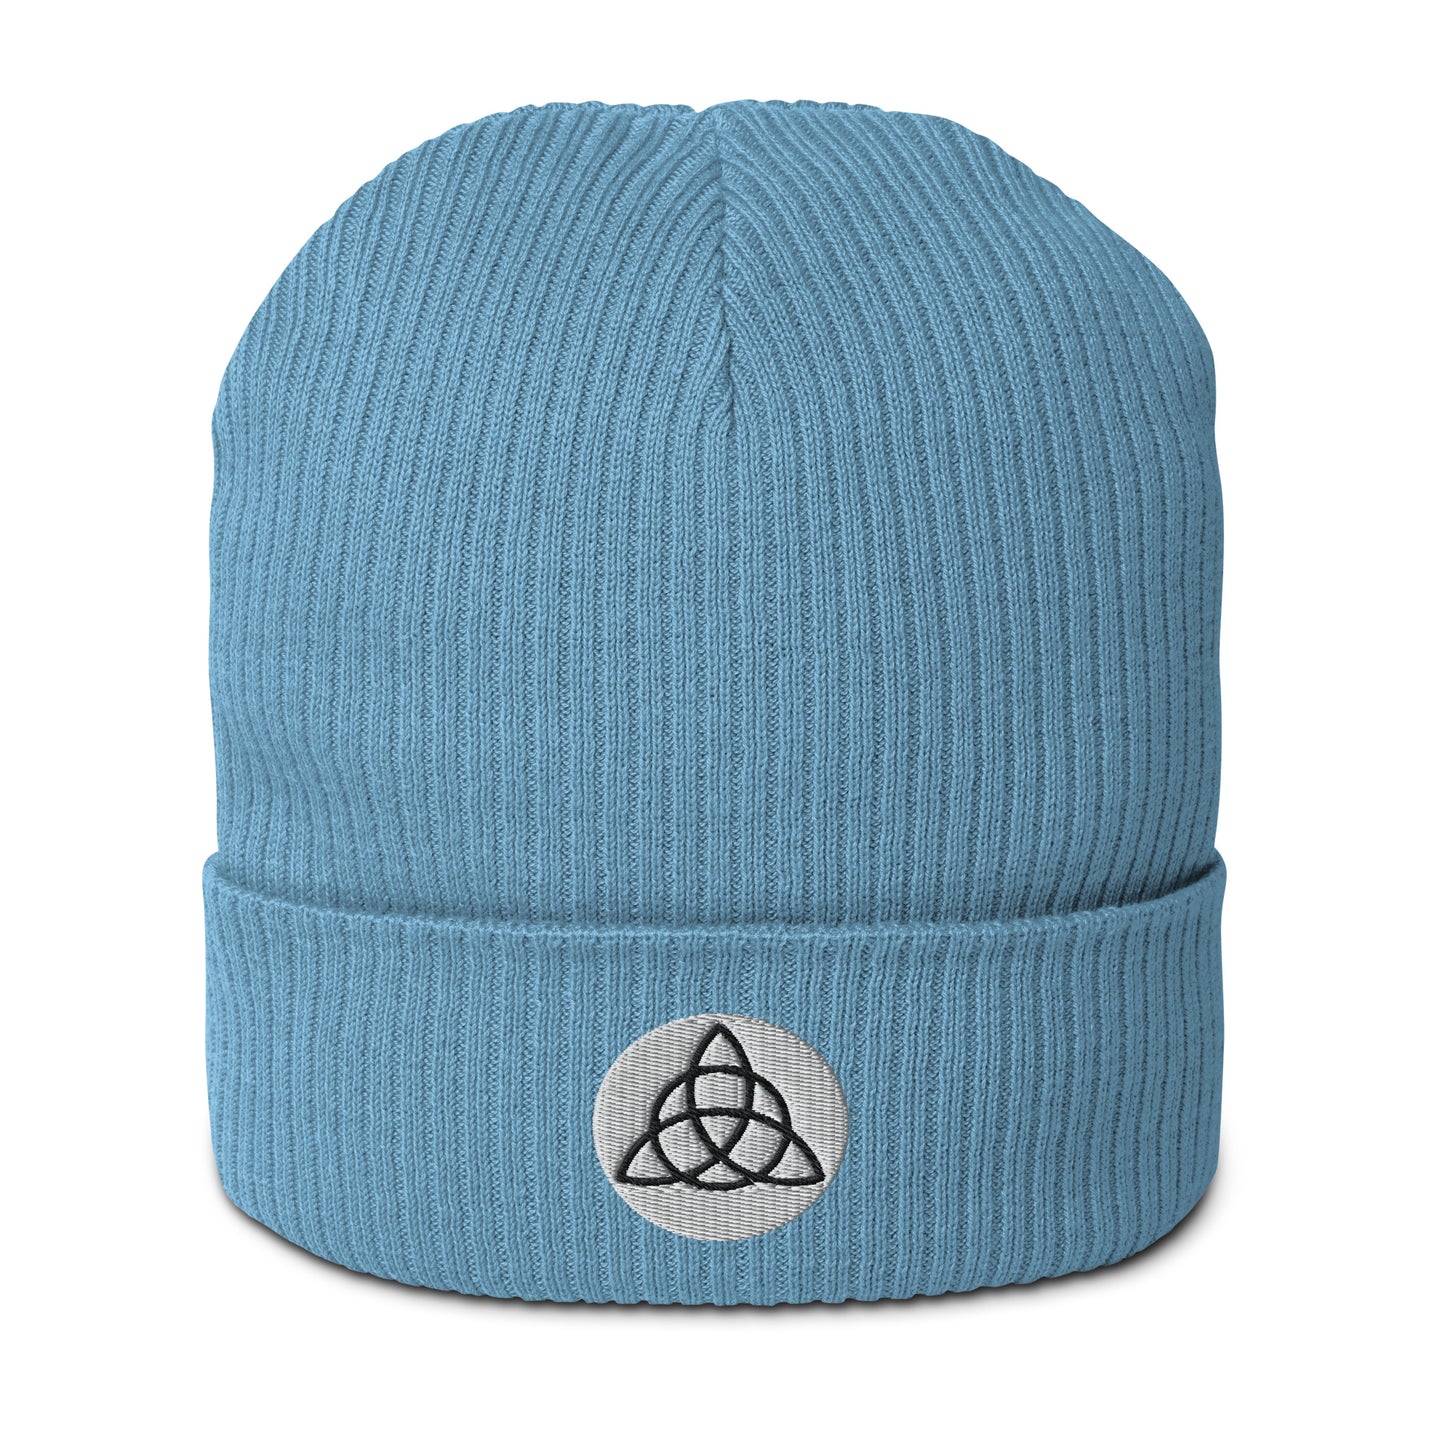  A ribbed beanie in Bermuda Blue hat made of organic cotton, embroidered with a Triquetra symbol, symbolizing unity, eternity, and the interconnectedness of mind, body, and spirit. This organic ribbed beanie is chic, versatile, and environmentally conscious, making it an essential addition to your hat collection. Crafted from breathable lightweight fabric, it's suitable for both indoor and outdoor wear. Made with hypoallergenic and natural materials. 